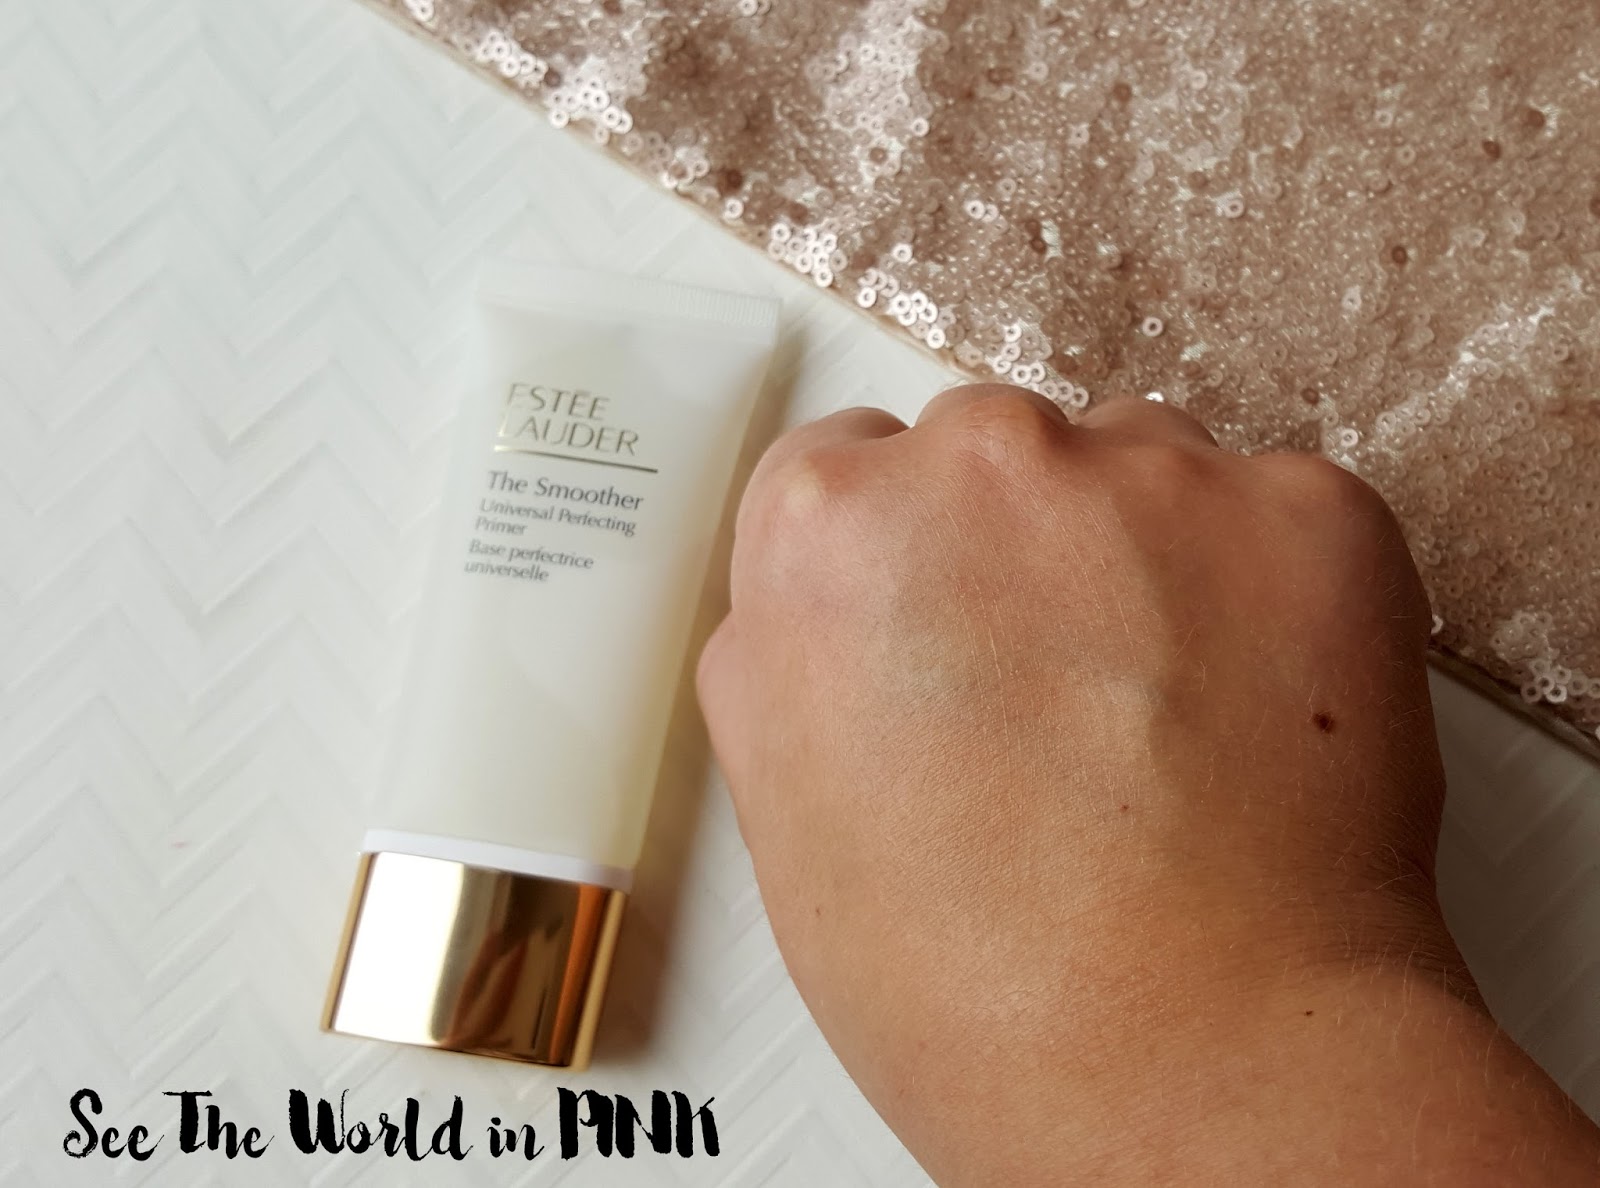 Estee Lauder - The Smoother Universal Perfecting Primer Review and Product Testing! 